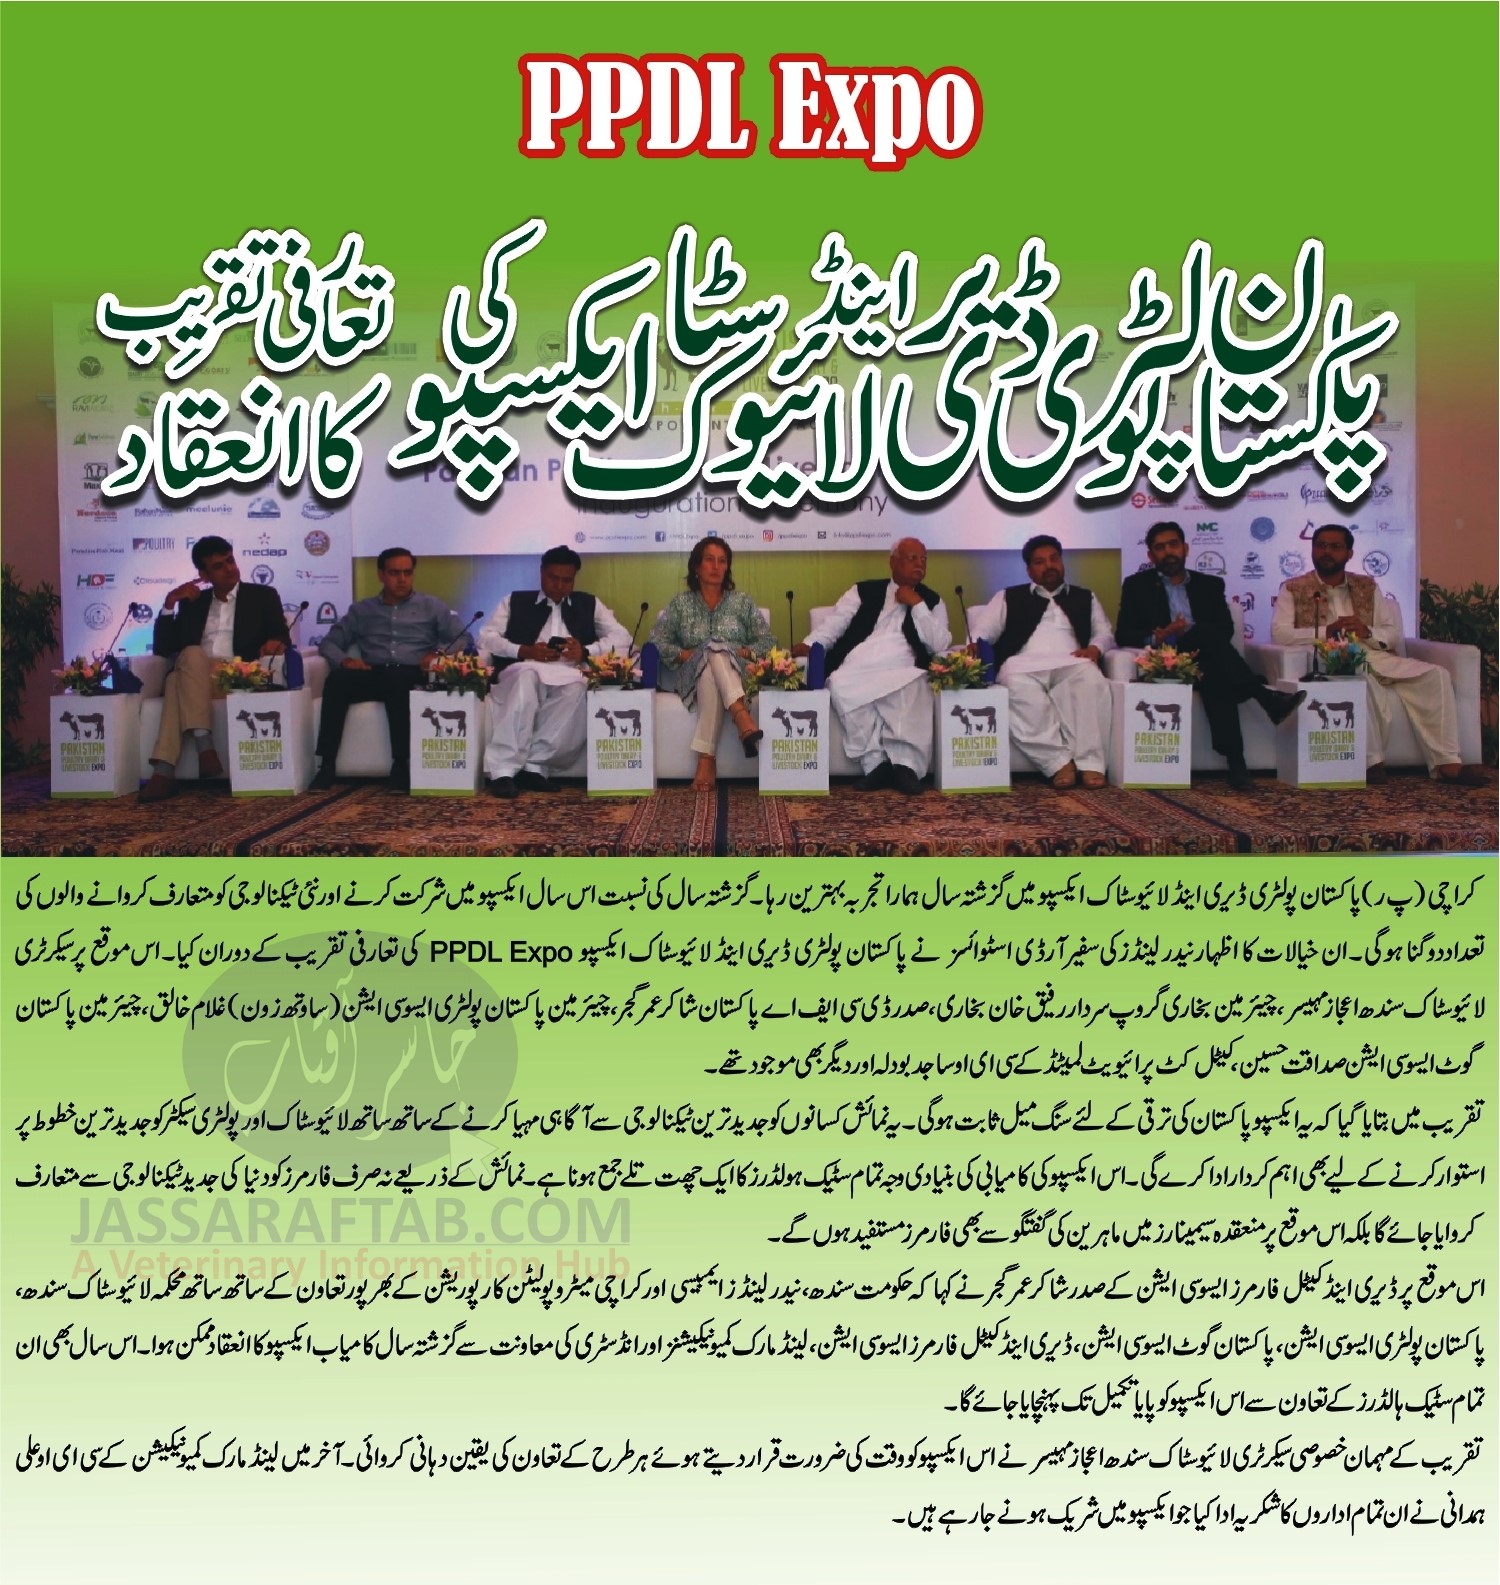 PPDL Expo | Introductory Session held in Karachi 